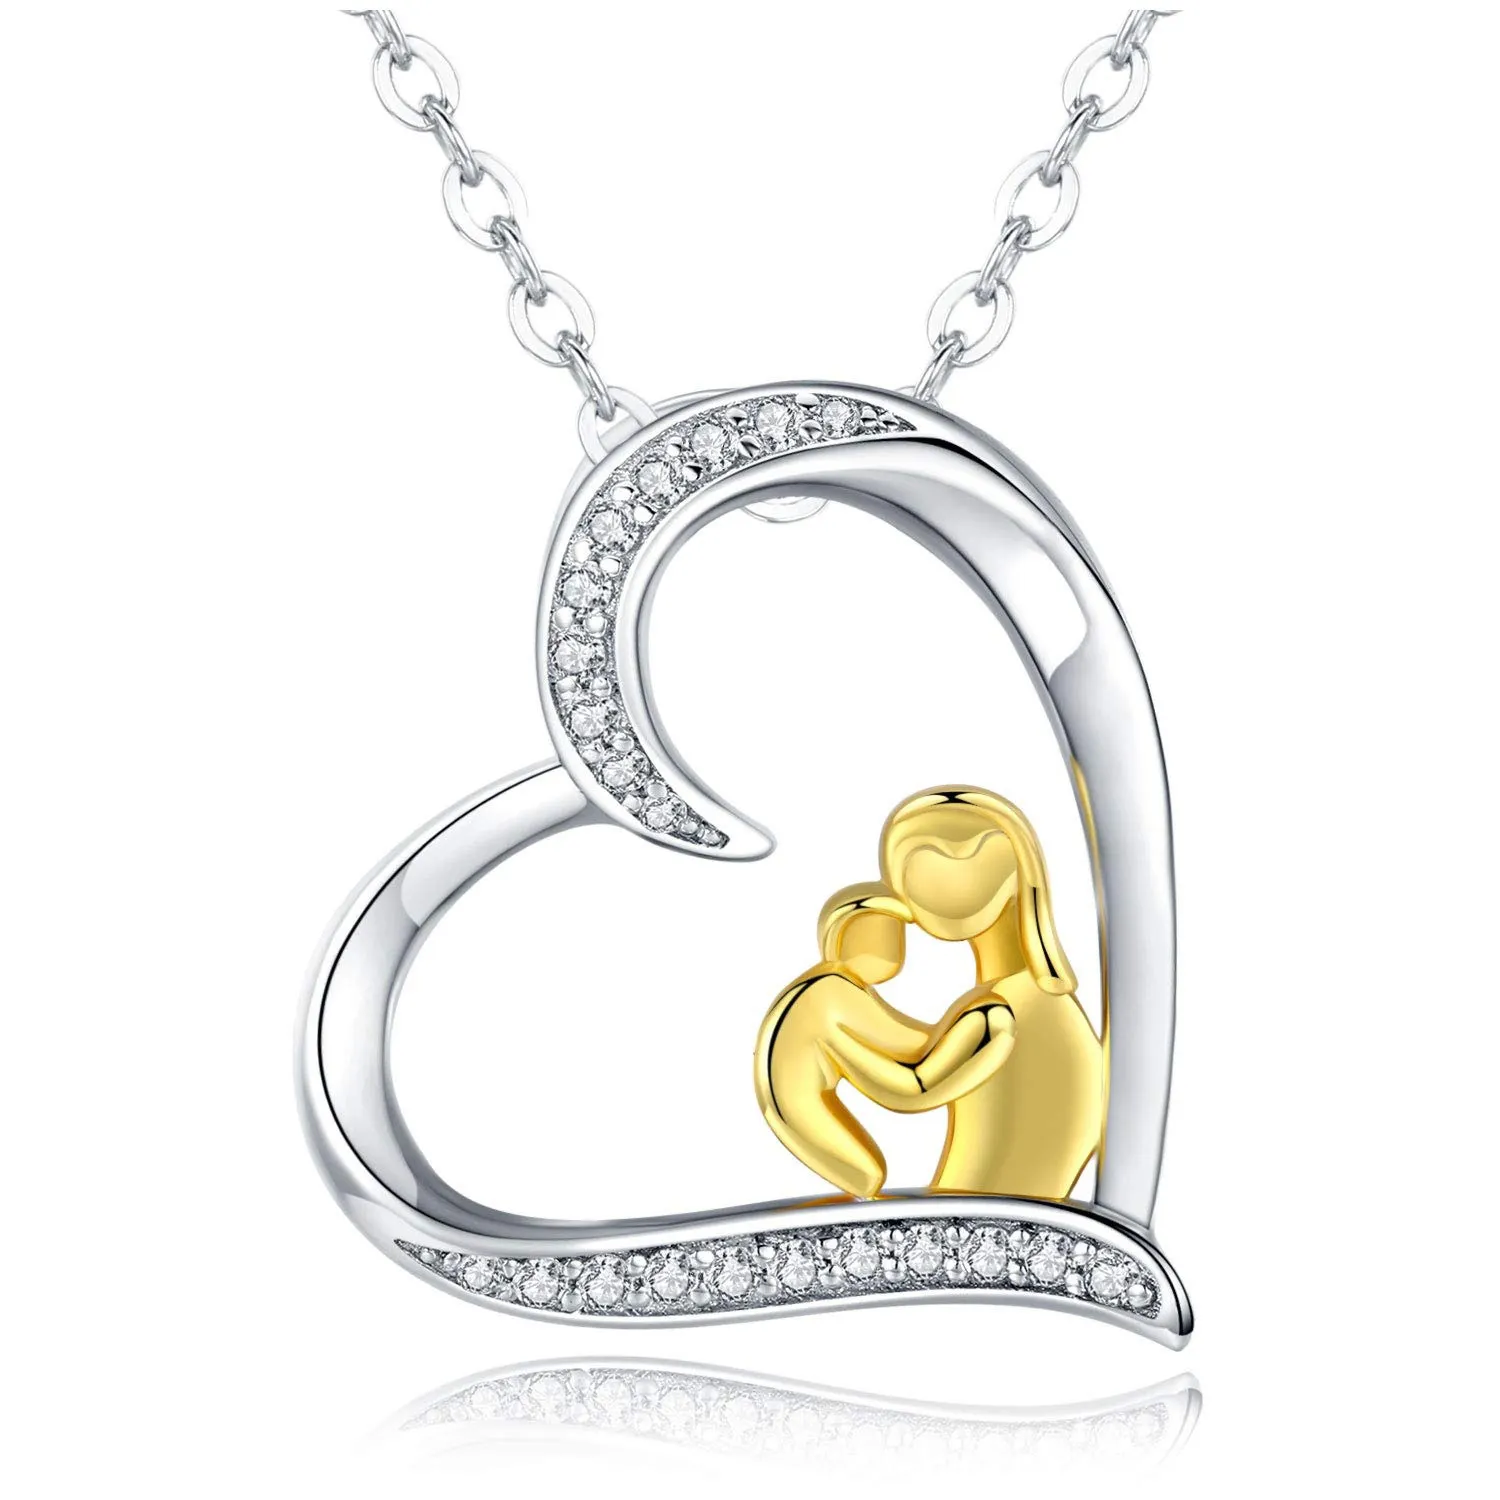 Luxury Diamond 925 Sterling Silver Heart Mothers Day Gifts MOM SUN Necklace Pendant Jewelry Birthday Gifts